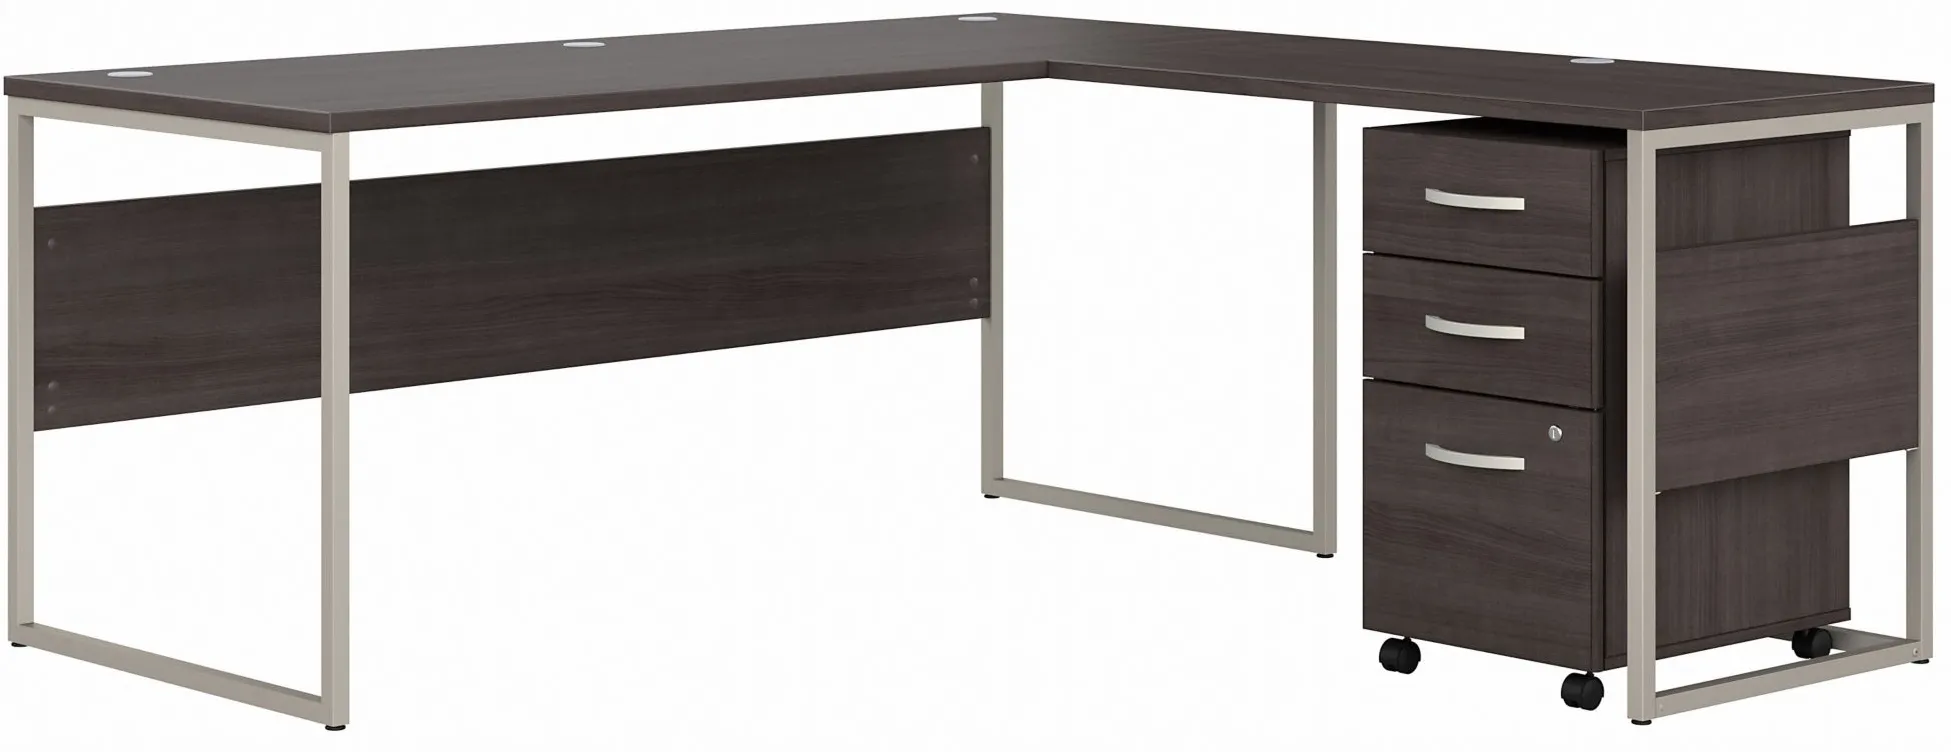 Steinbeck L-Shaped Desk w/ File Cabinet in Storm Gray by Bush Industries